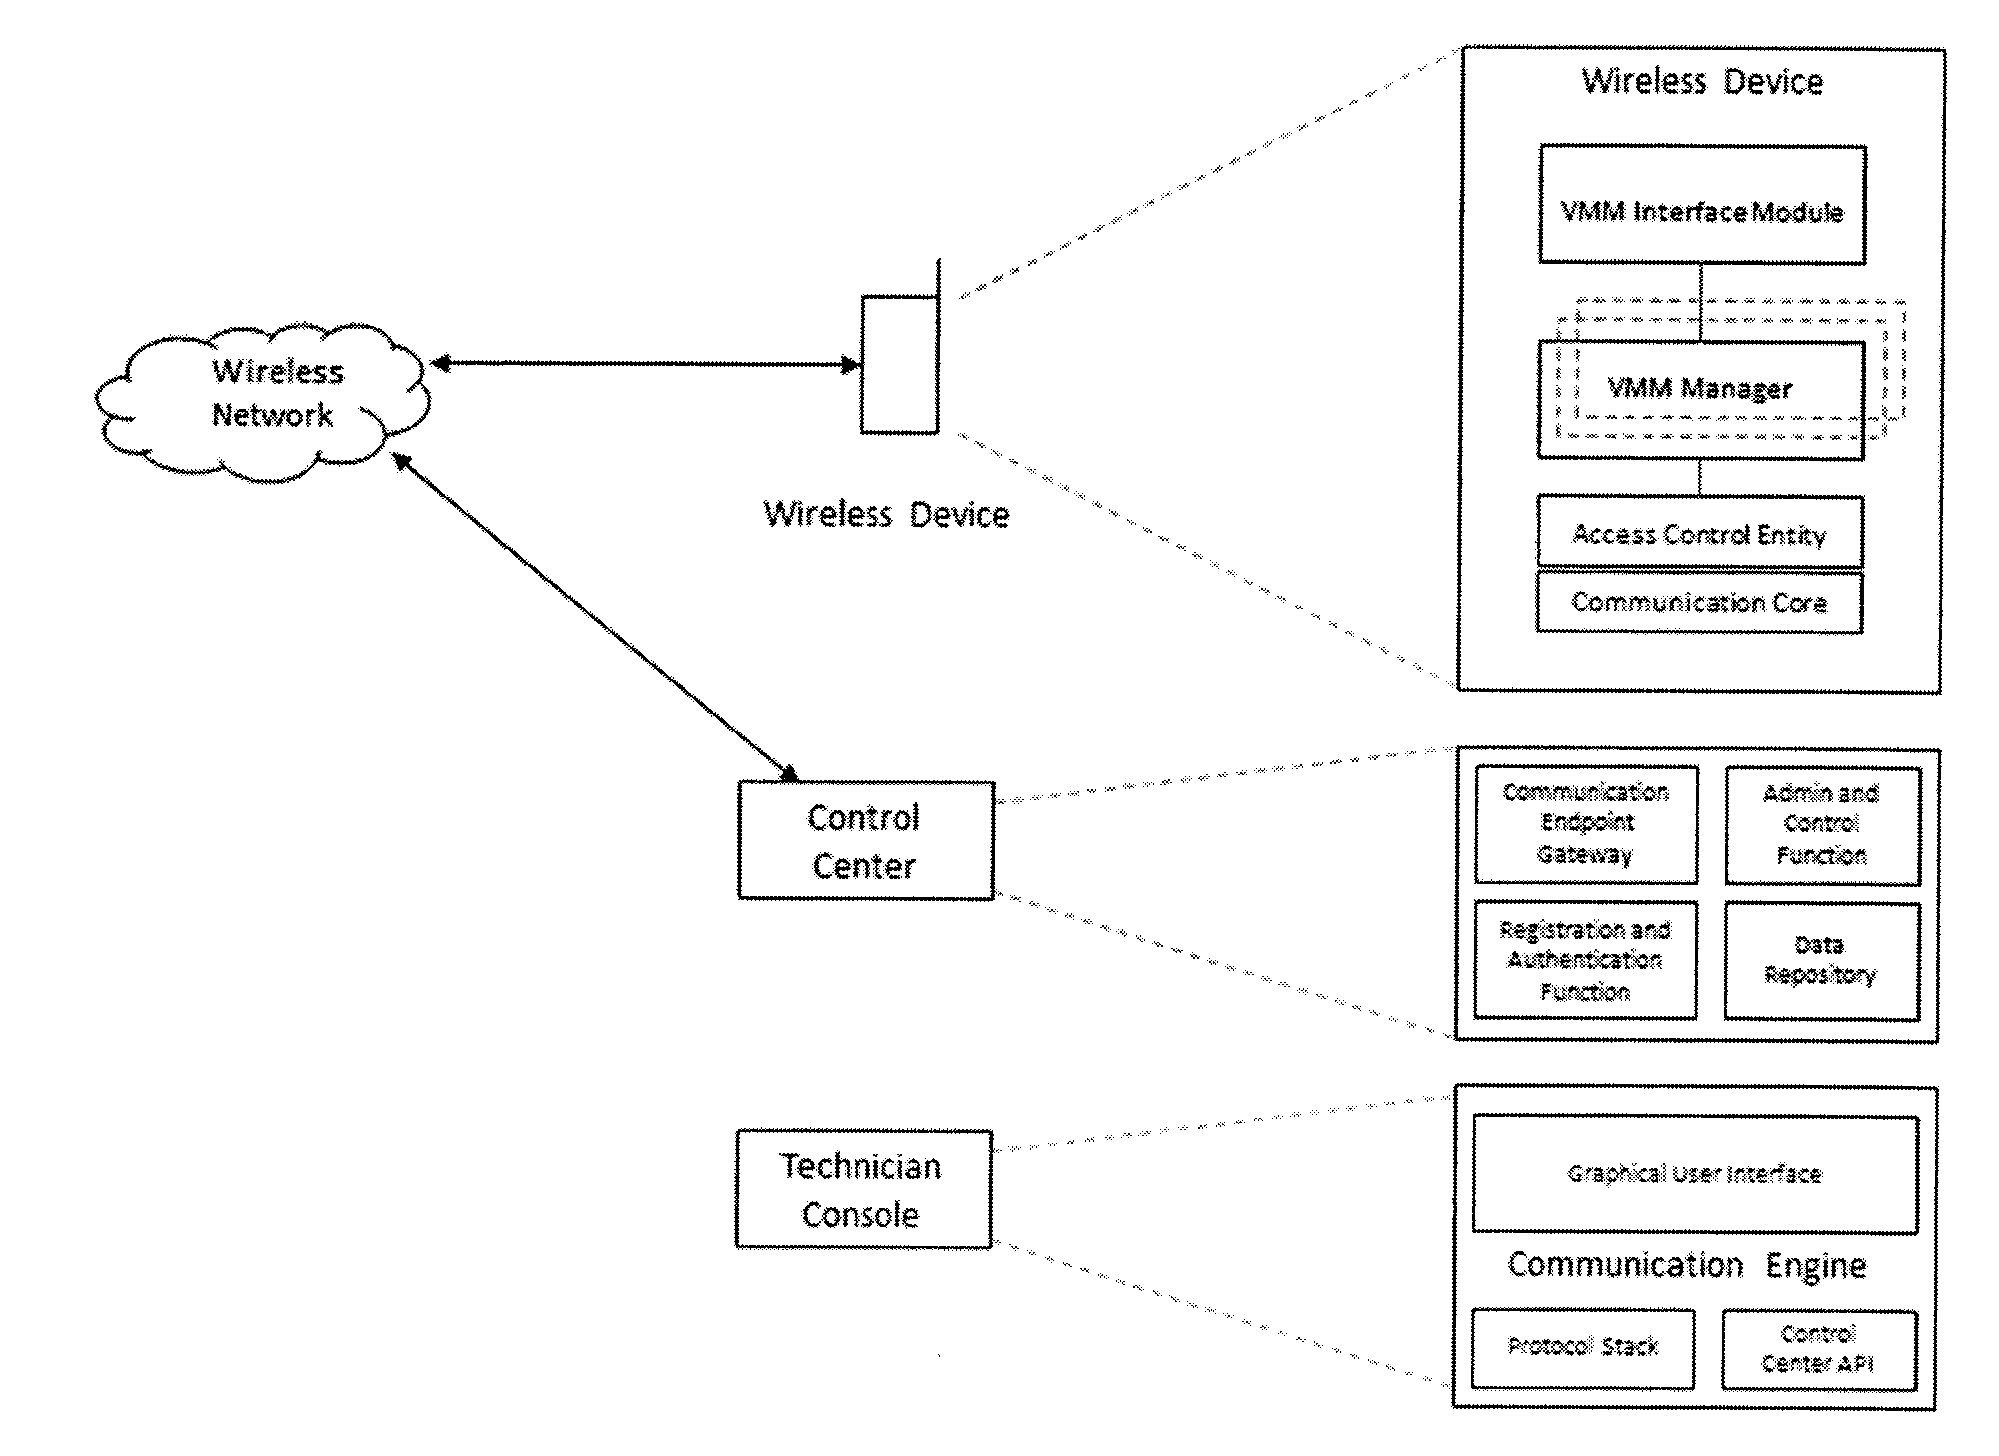 Connection authorization with a privileged access